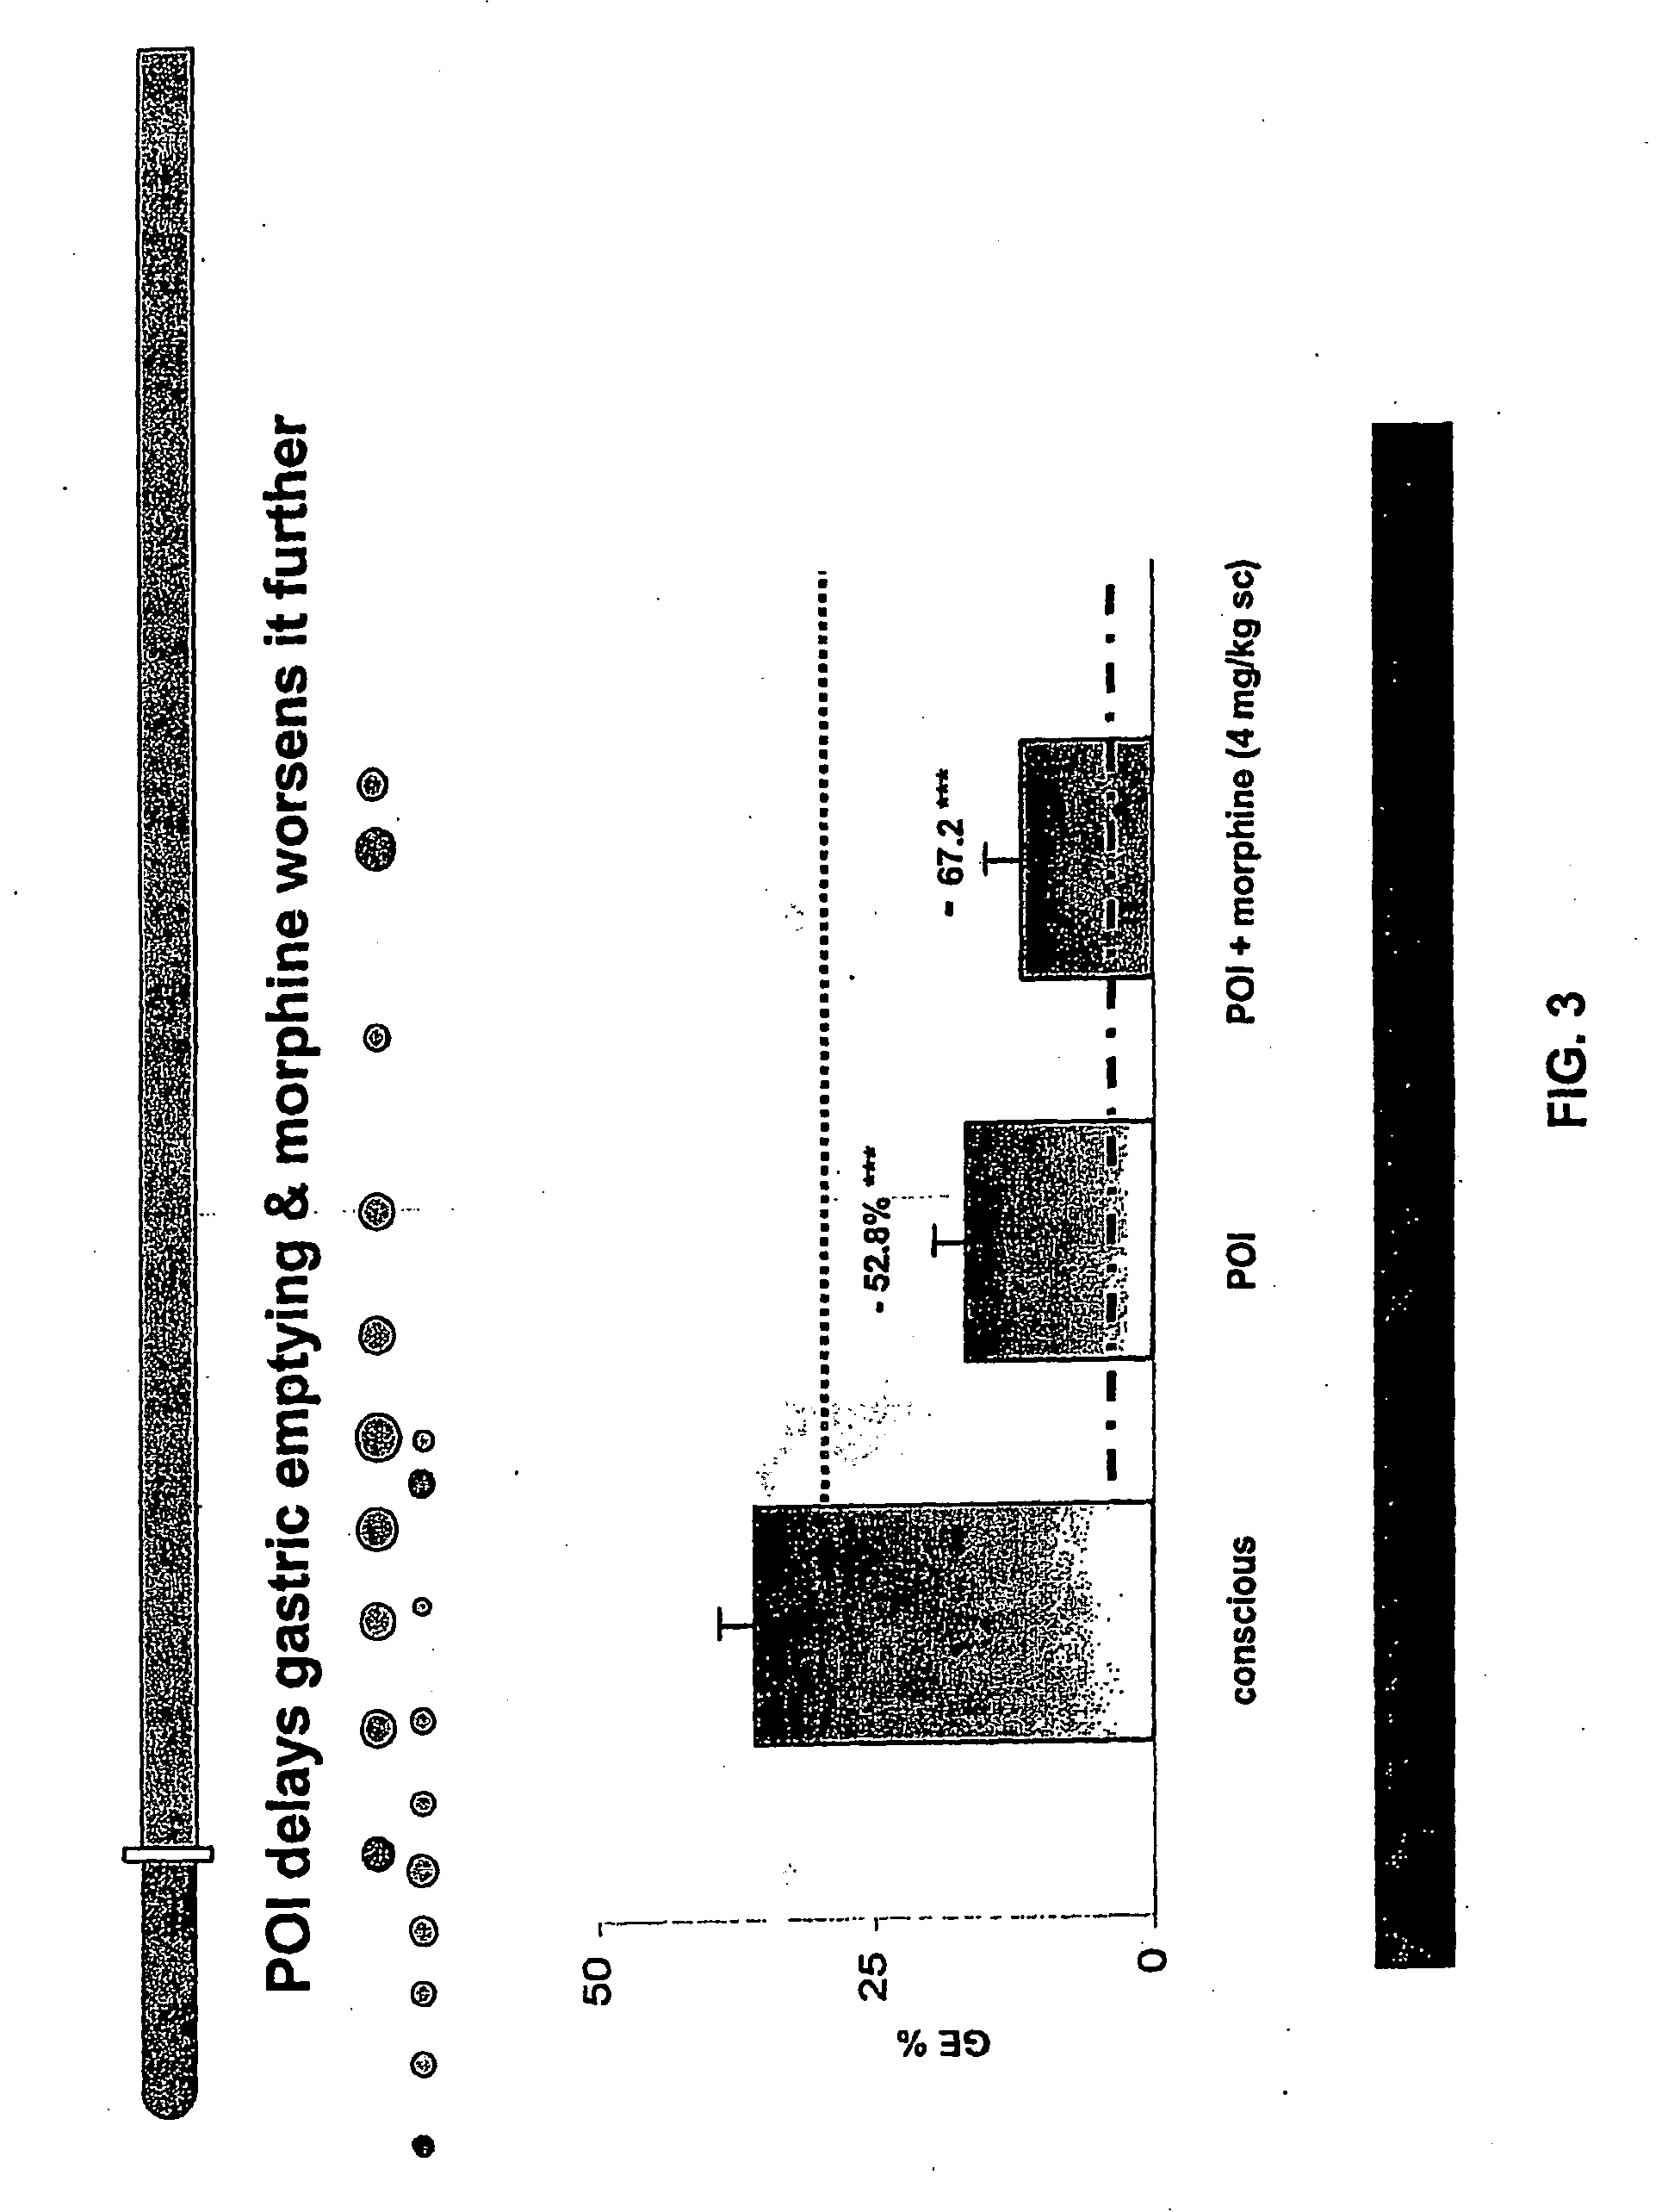 Compositions and Methods for Stimulating Gastrointestinal Motility